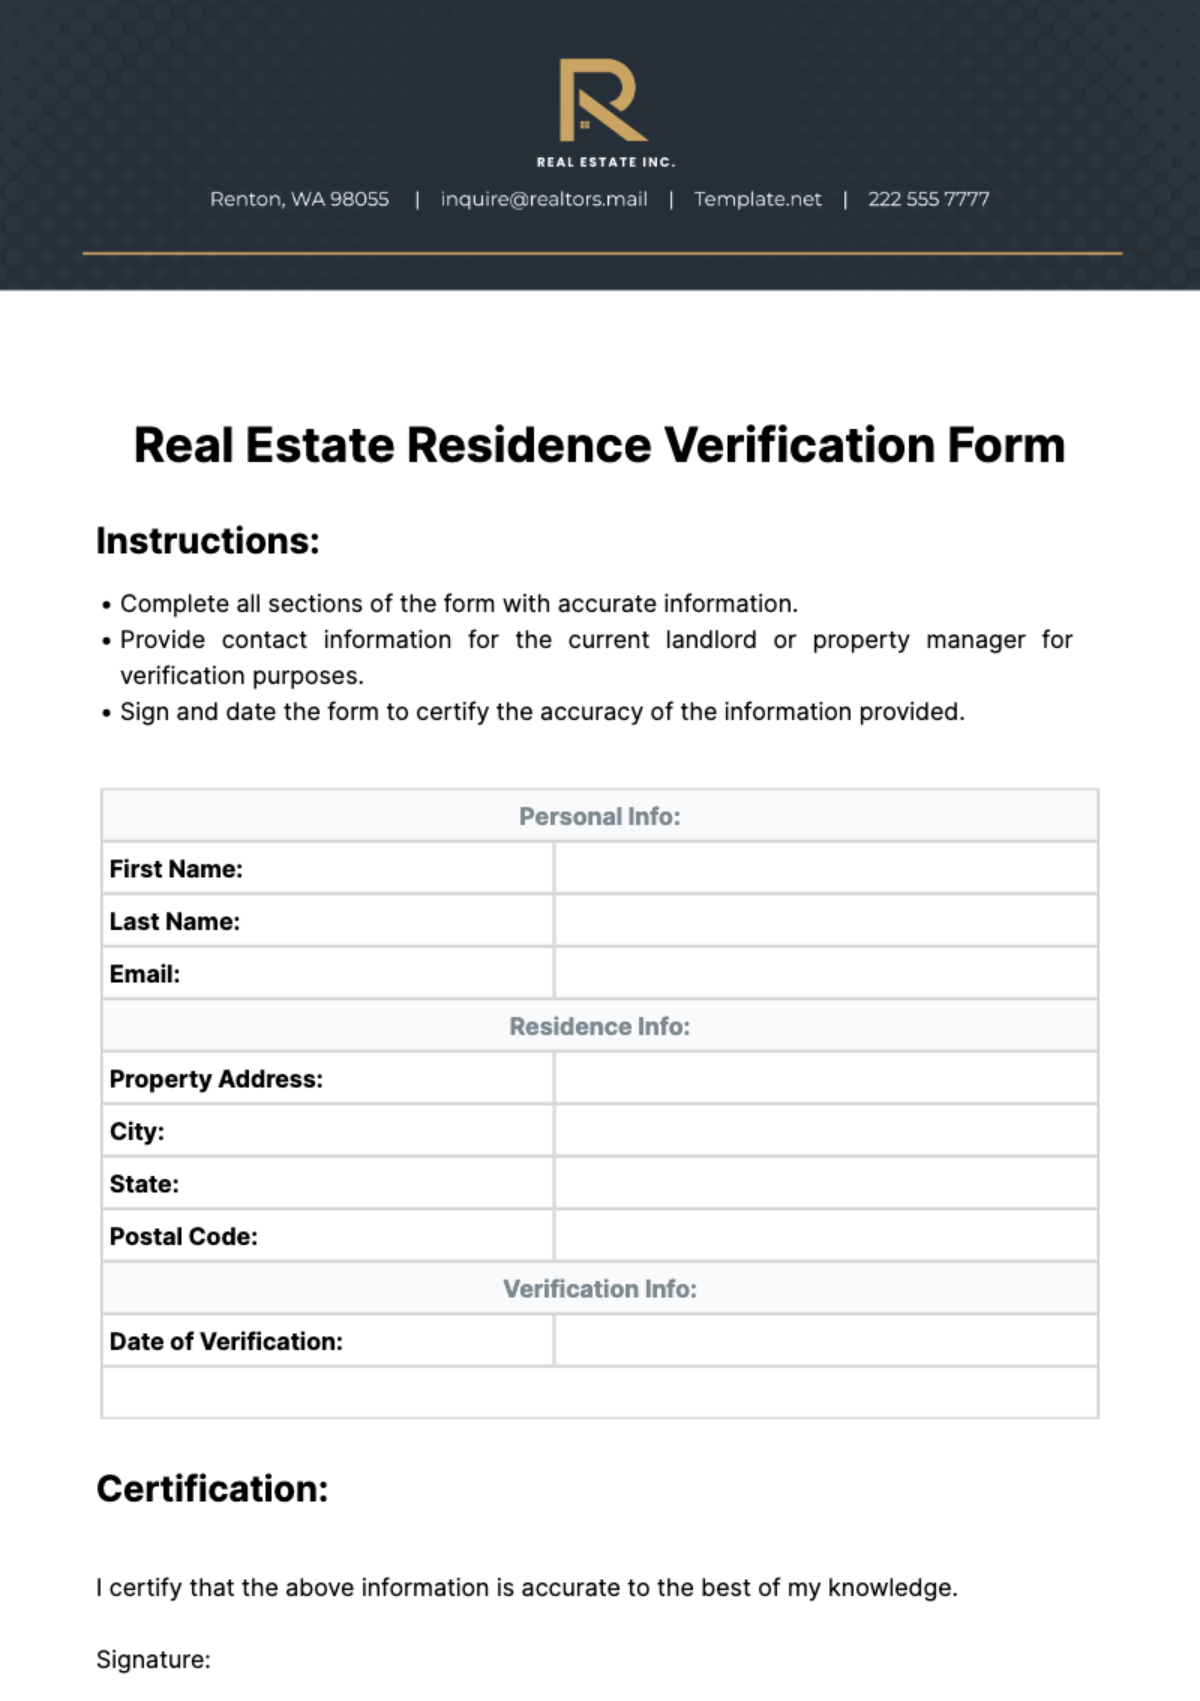 Real Estate Residence Verification Form Template